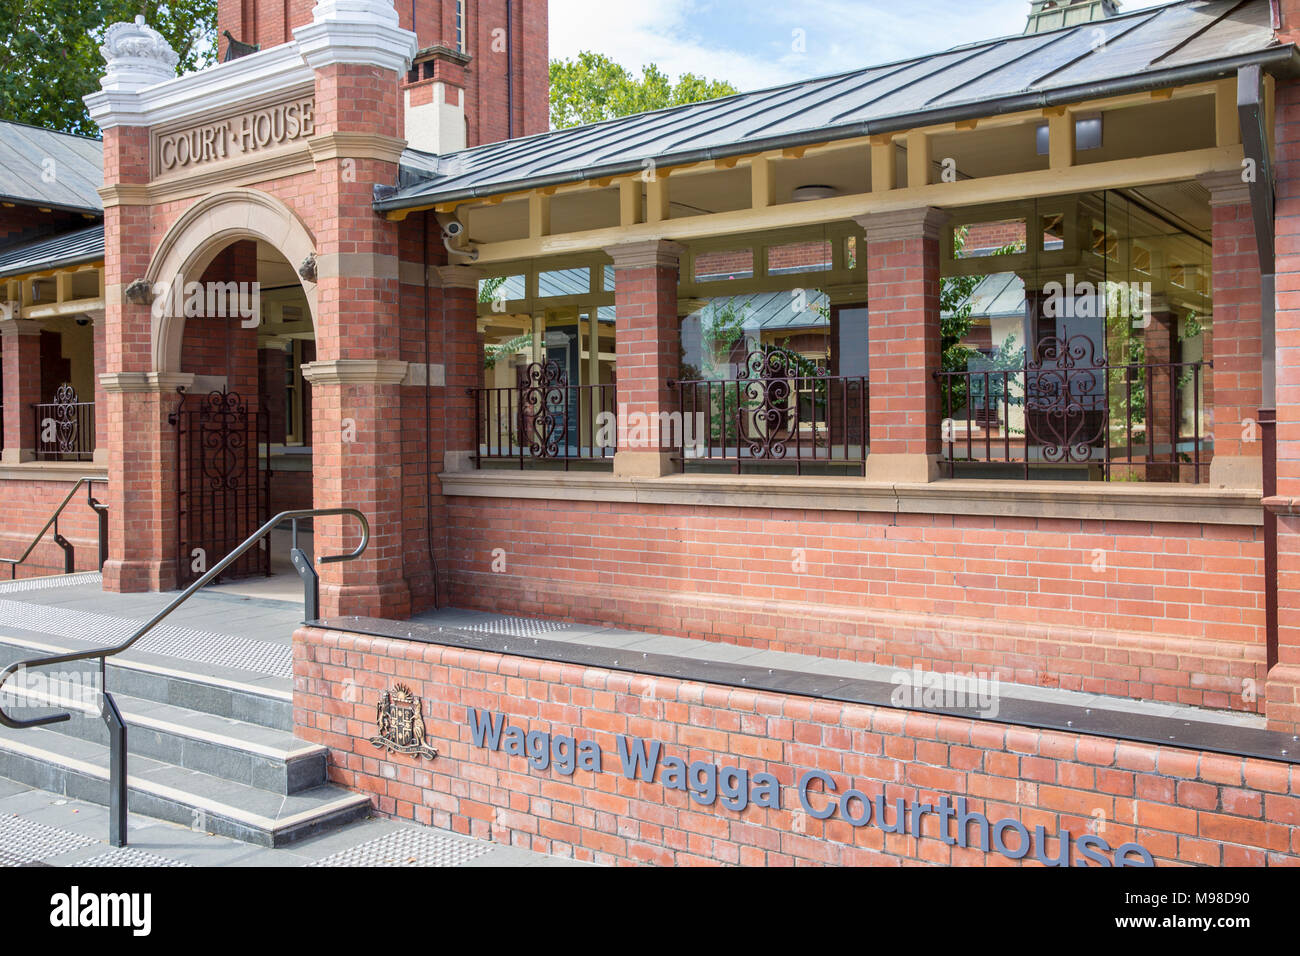 Wagga Wagga Court House Building dans le centre-ville, New South Wales, Australie Banque D'Images